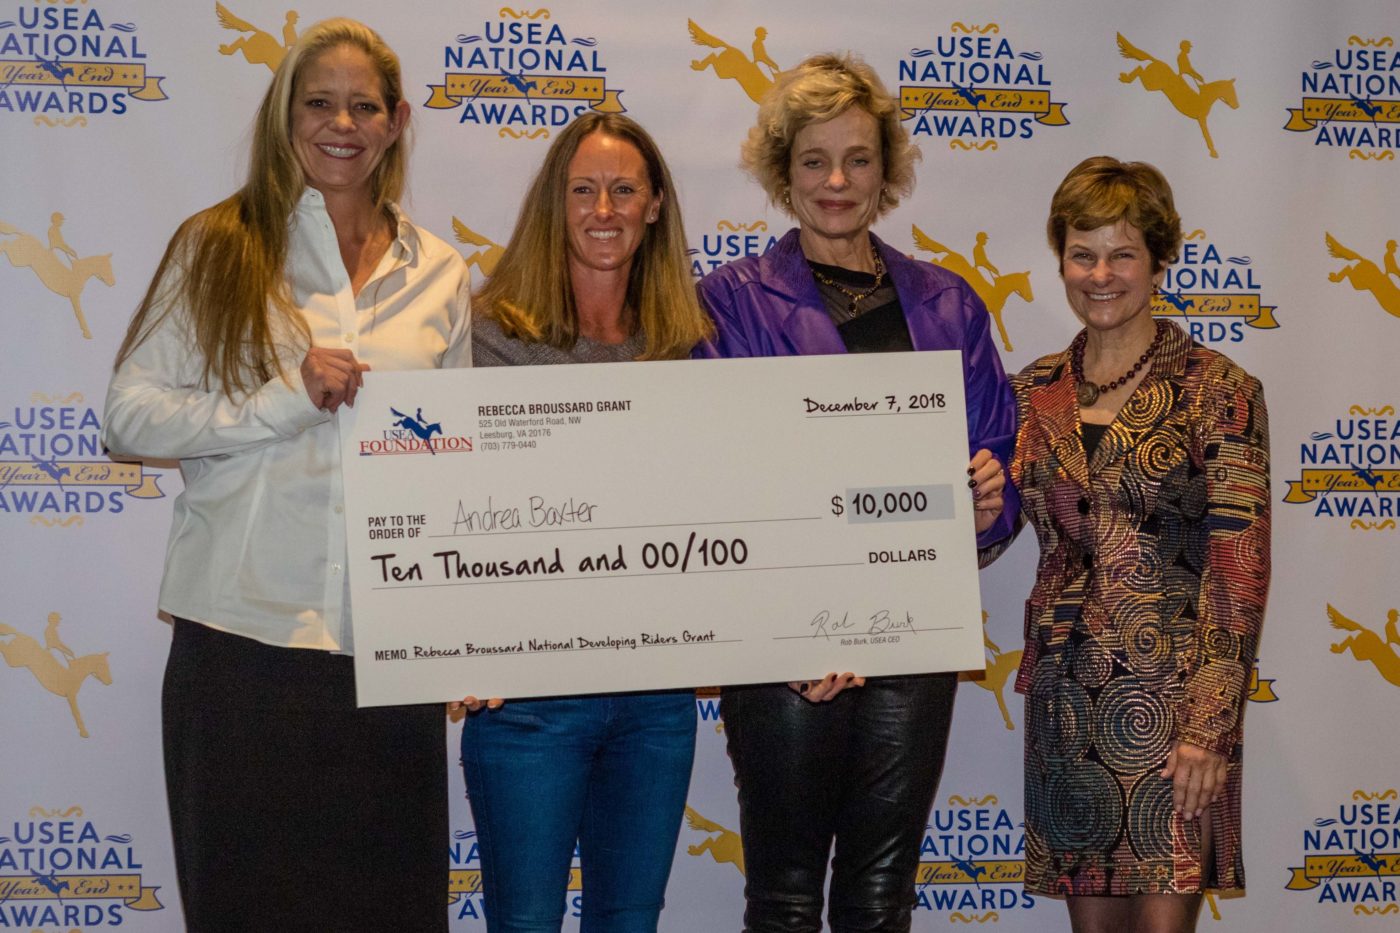 Sarah and Rebecca Broussard presented Andrea Baxter with the $10,000 Rebecca Broussard National Developing Rider Grant.